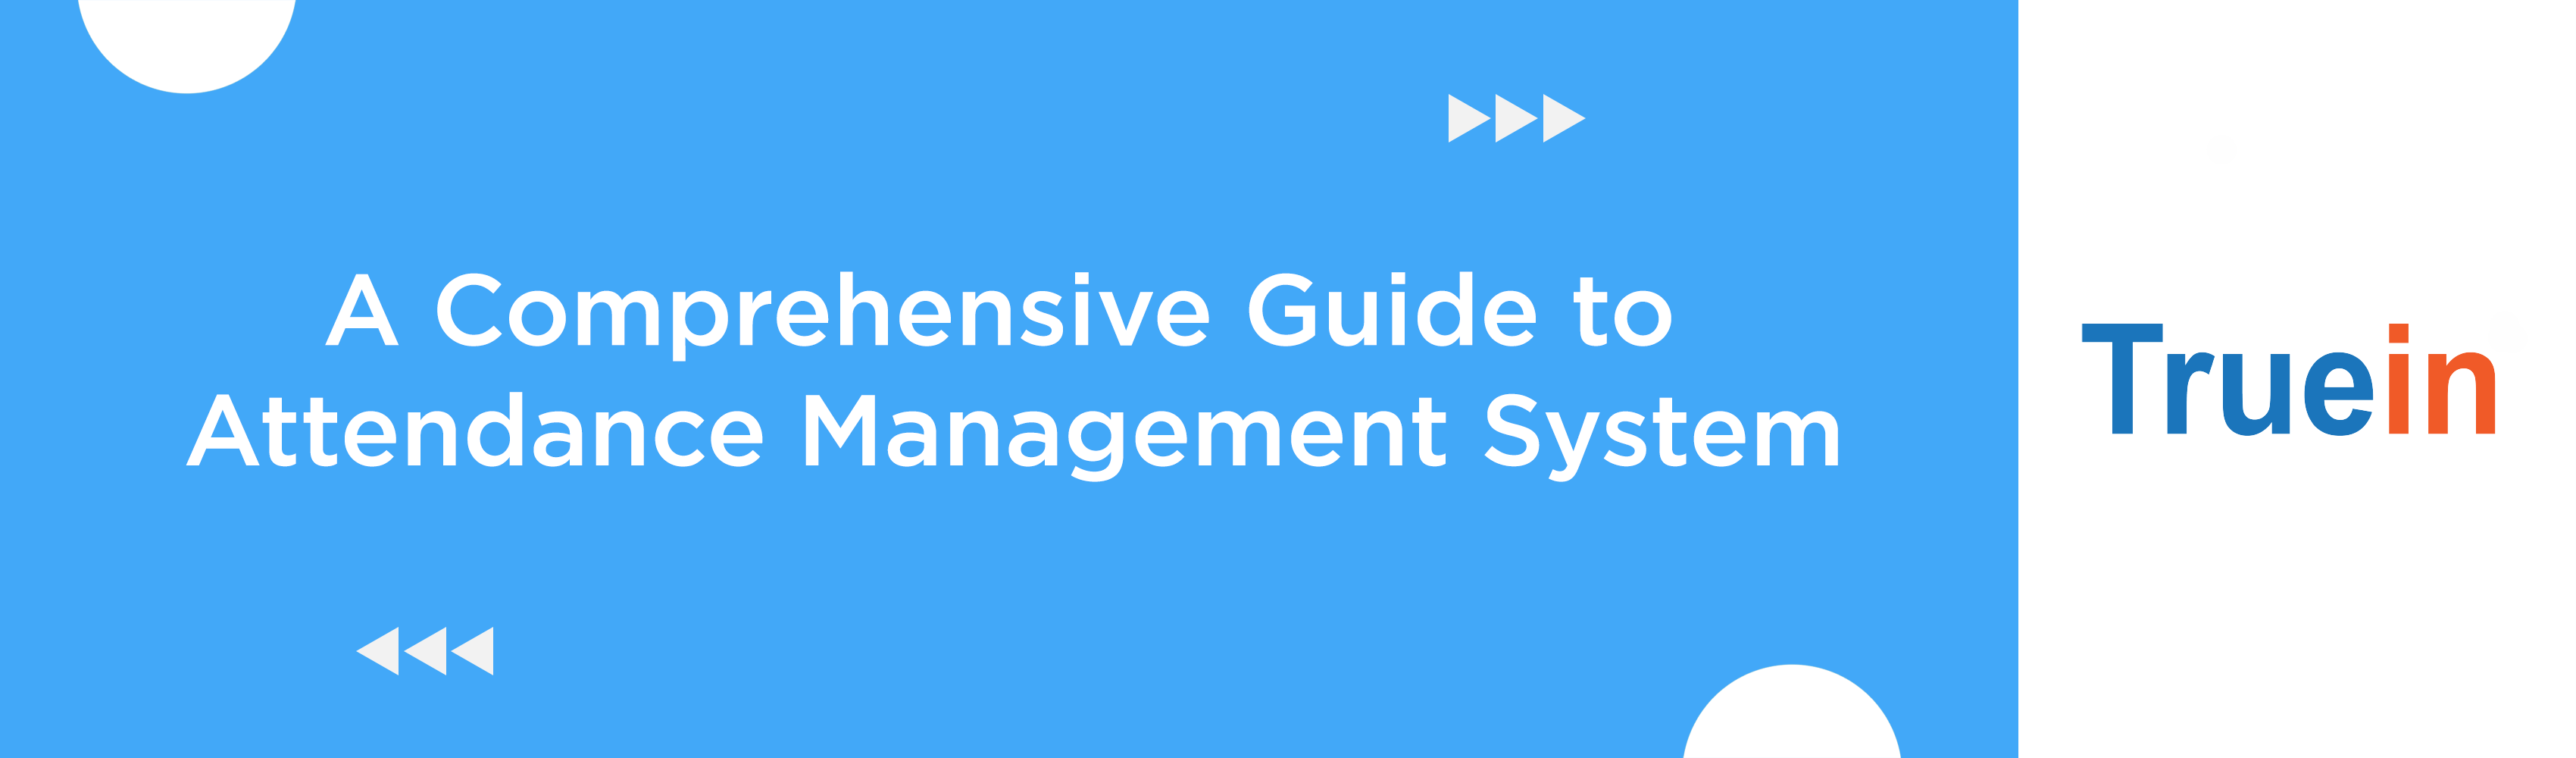 A Comprehensive Guide to Attendance Management System